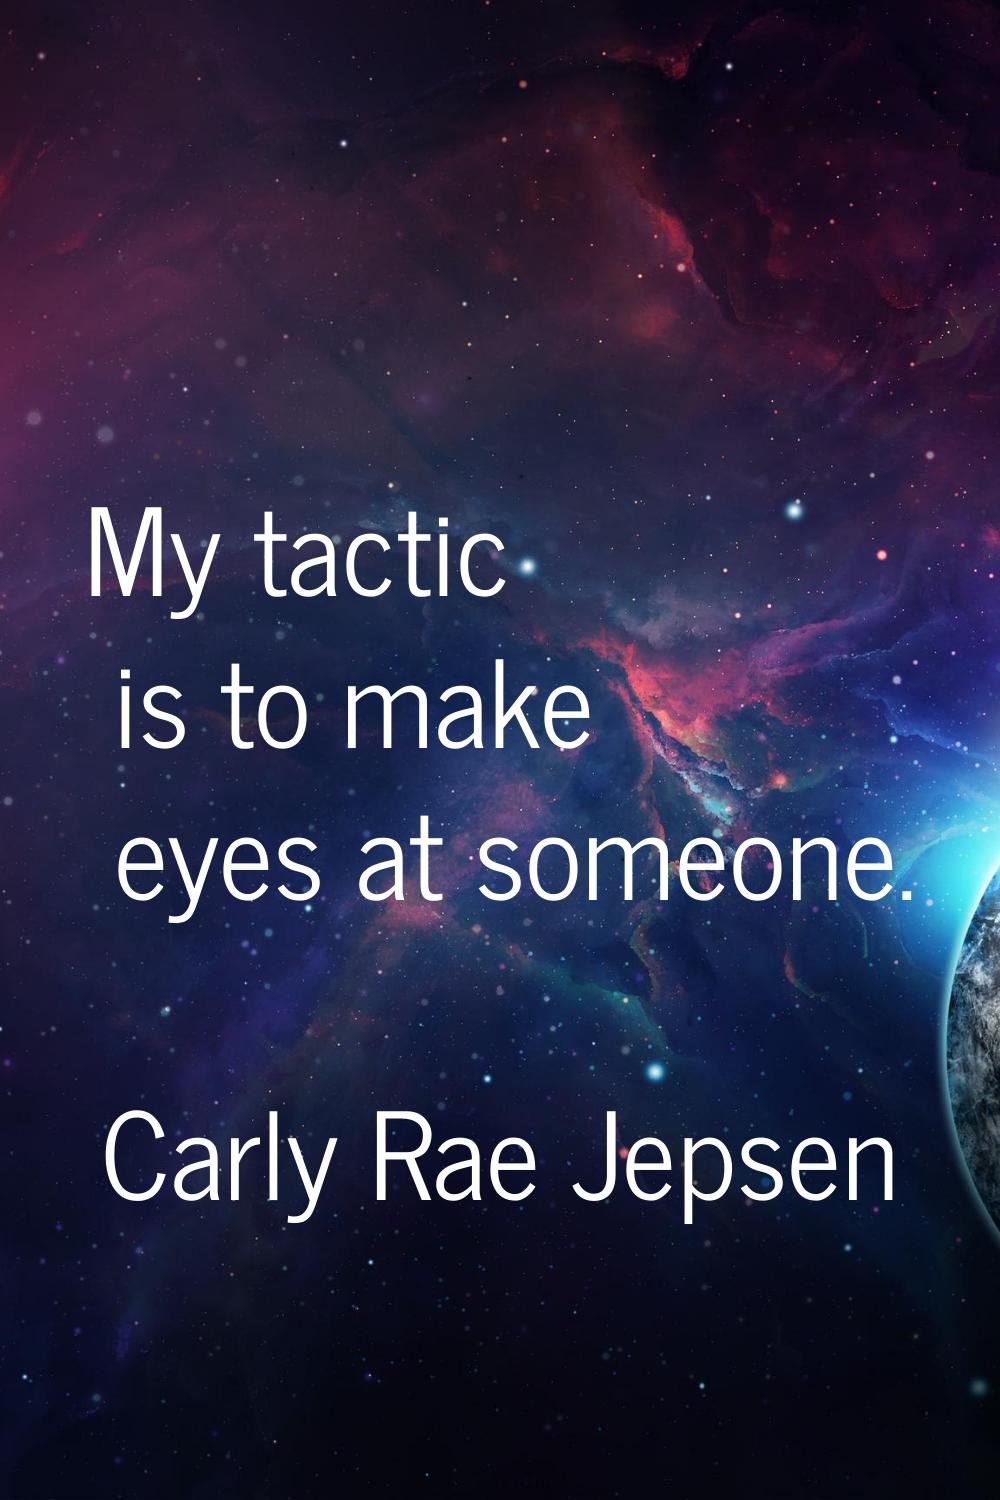 My tactic is to make eyes at someone.